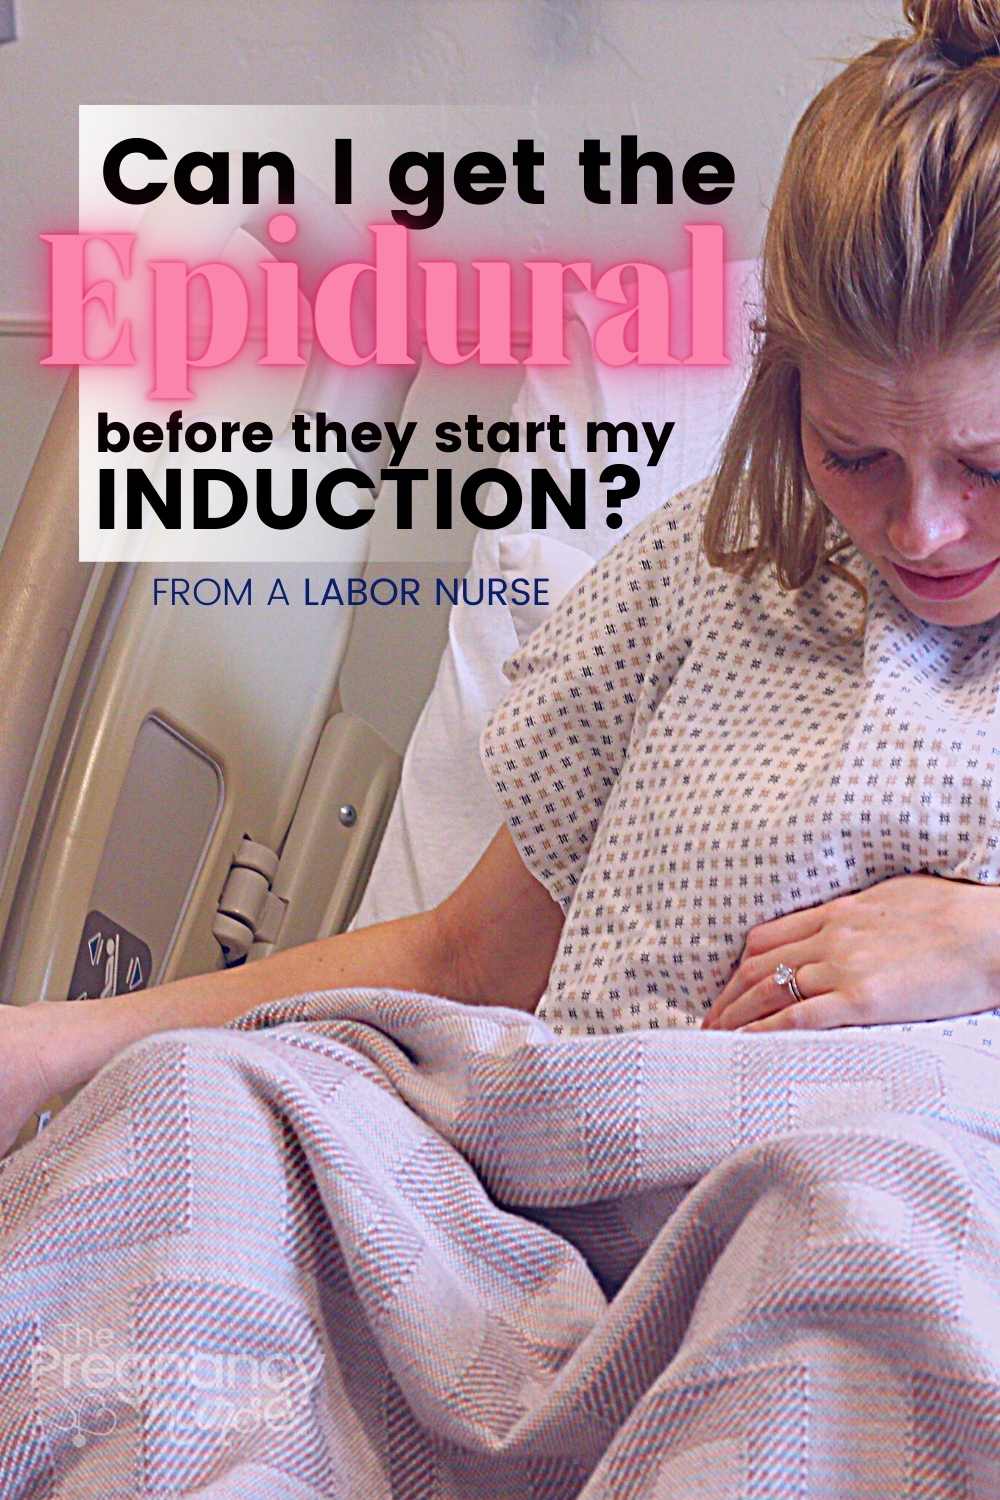 Making the choice to get an epidural during an induction can be confusing. If you know you're going to look for pain relief with an epidural, is there a reason to wait until they actually start your induction?